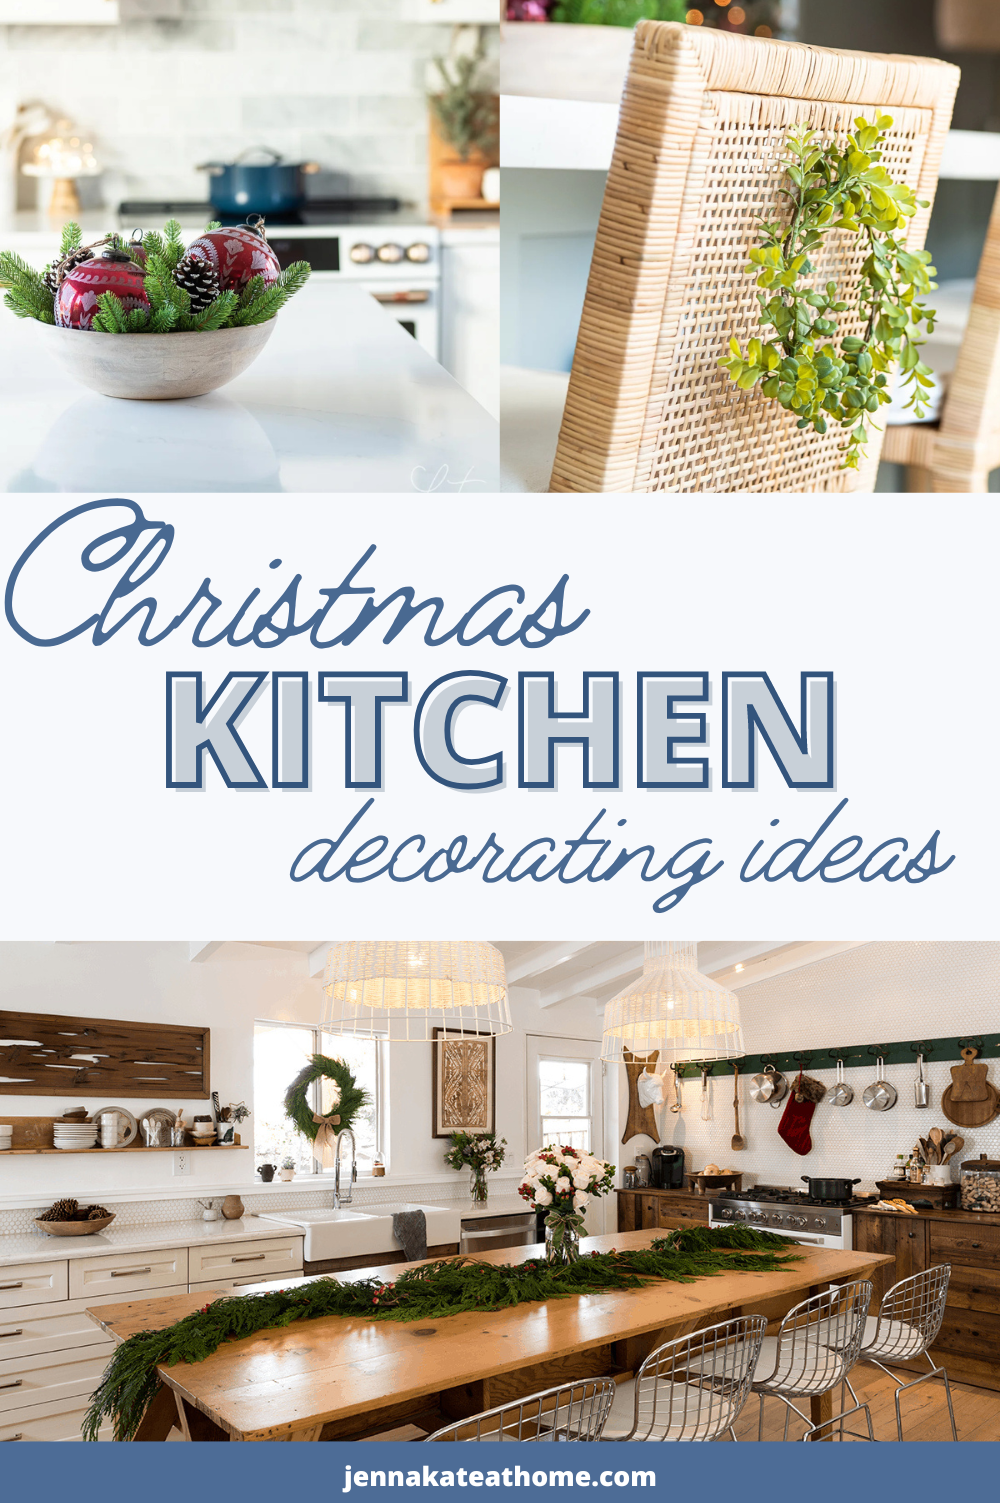 Christmas decorating ideas for the kitchen